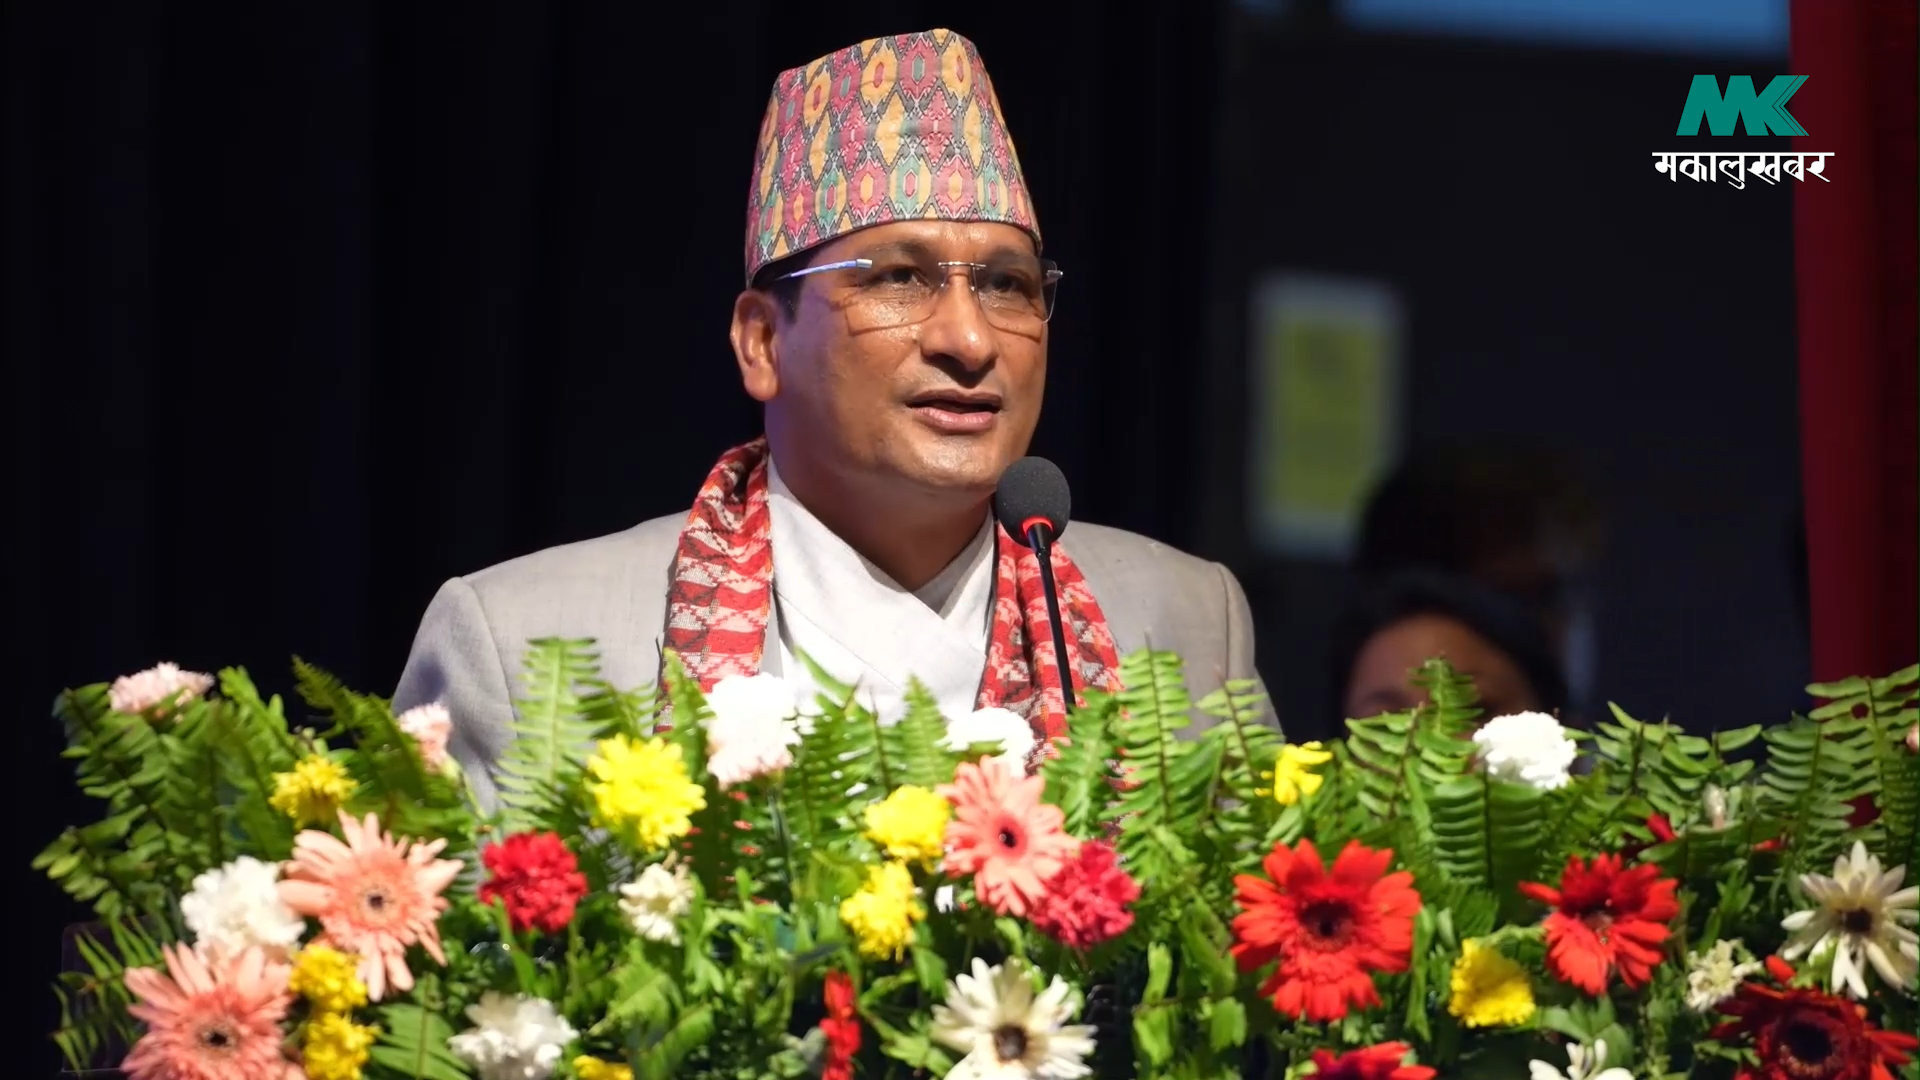 Impact of climate change is highest on water resources: Minister Basnet